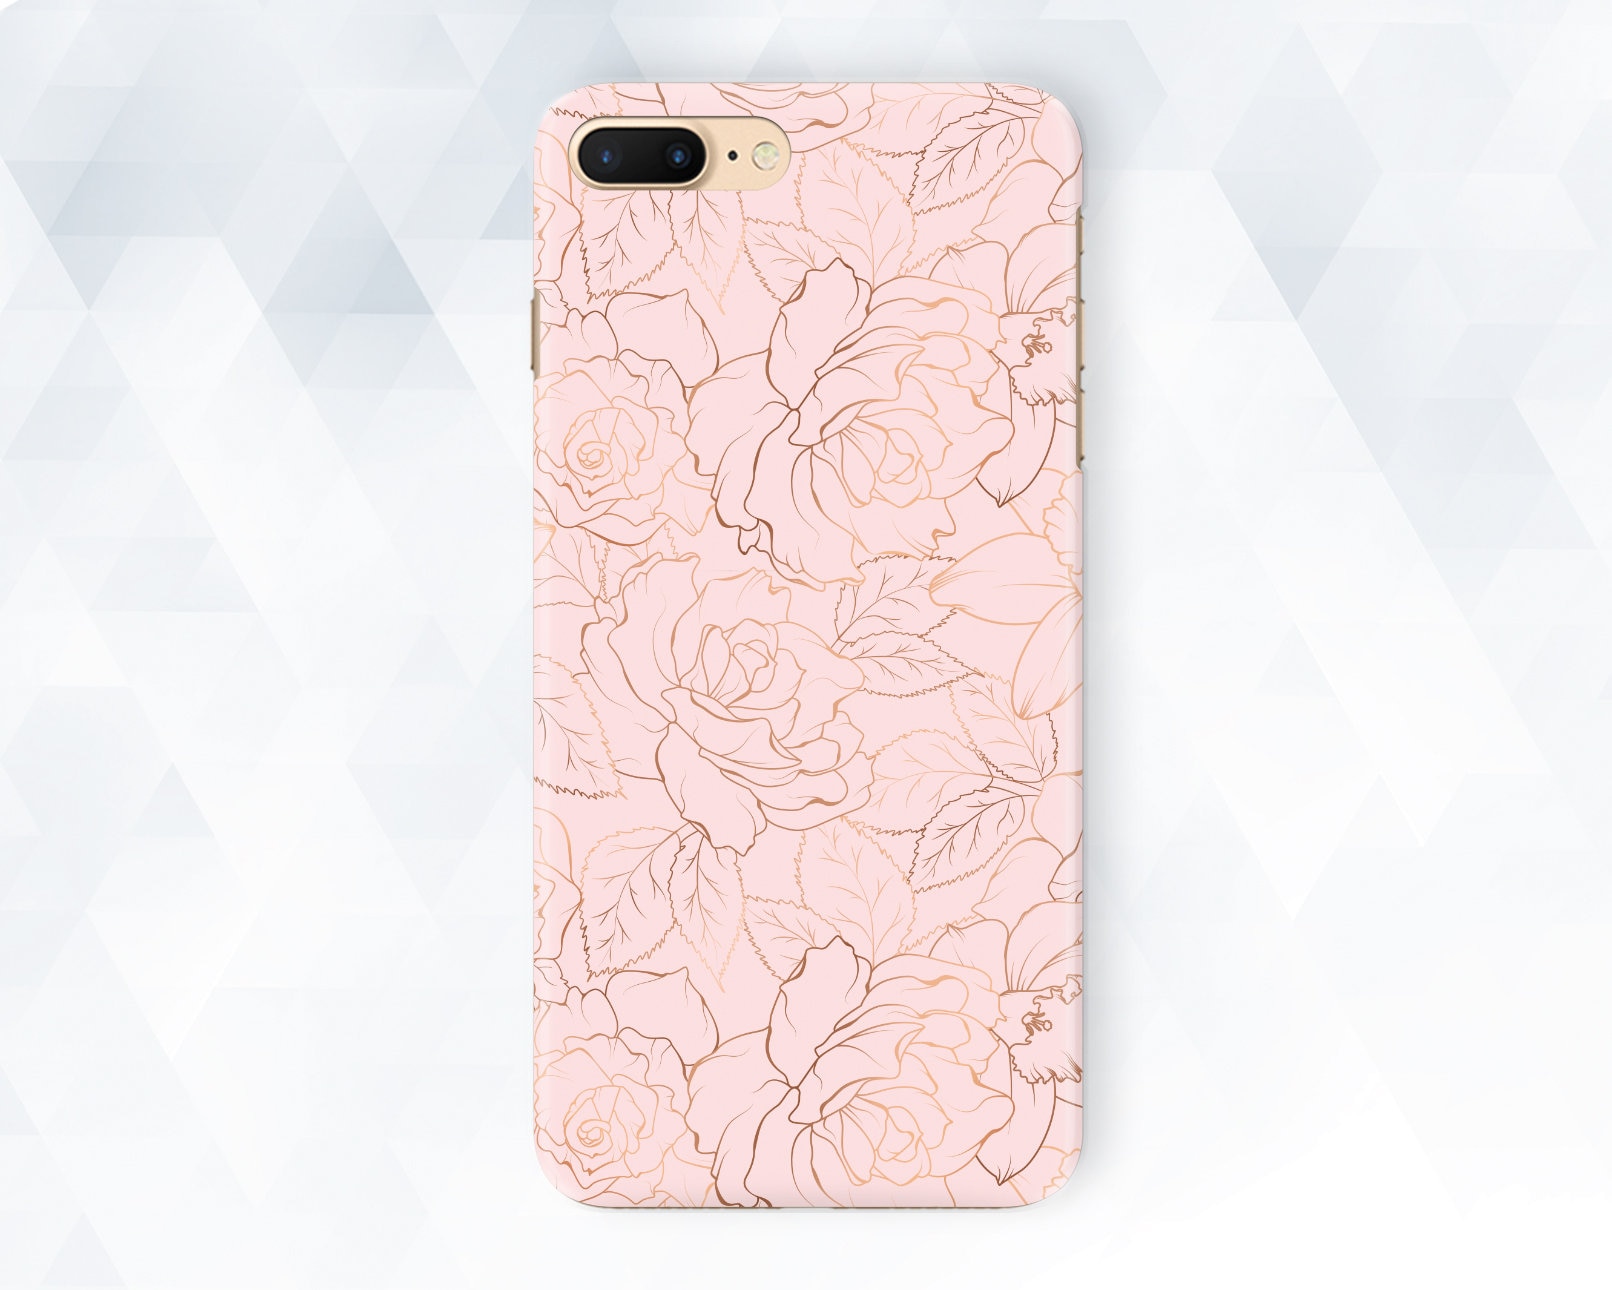 Cute Pink Butterfly on Glitter Aesthetic Background iPhone Case by  Aesthetic Wall Decor by SB Designs